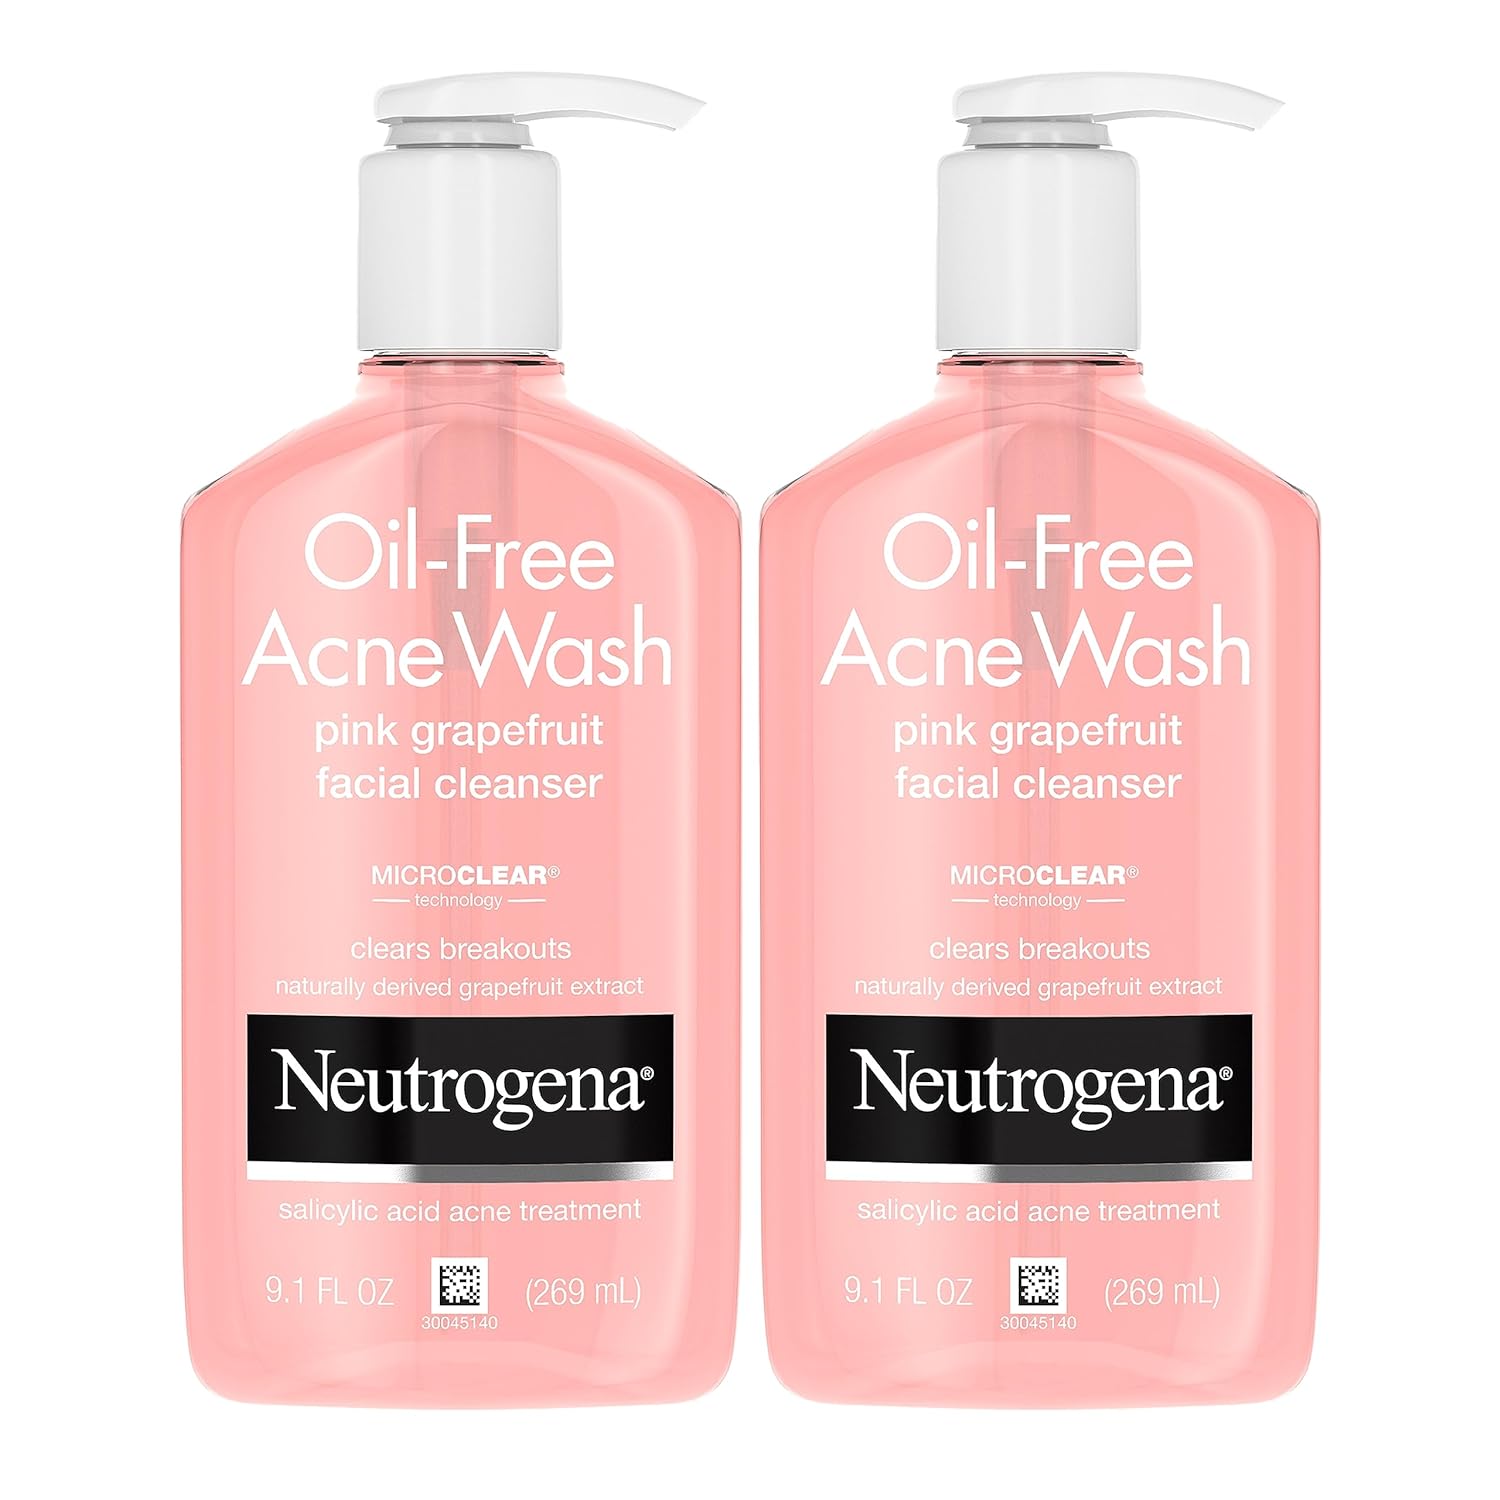 Neutrogena Oil-Free Pink Grapefruit Pore Cleansing Acne Wash and Daily Liquid Facial Cleanser with 2% Salicylic Acid Acne Medicine and Vitamin C, Twin Pack, 2 x 9.1 fl. Oz